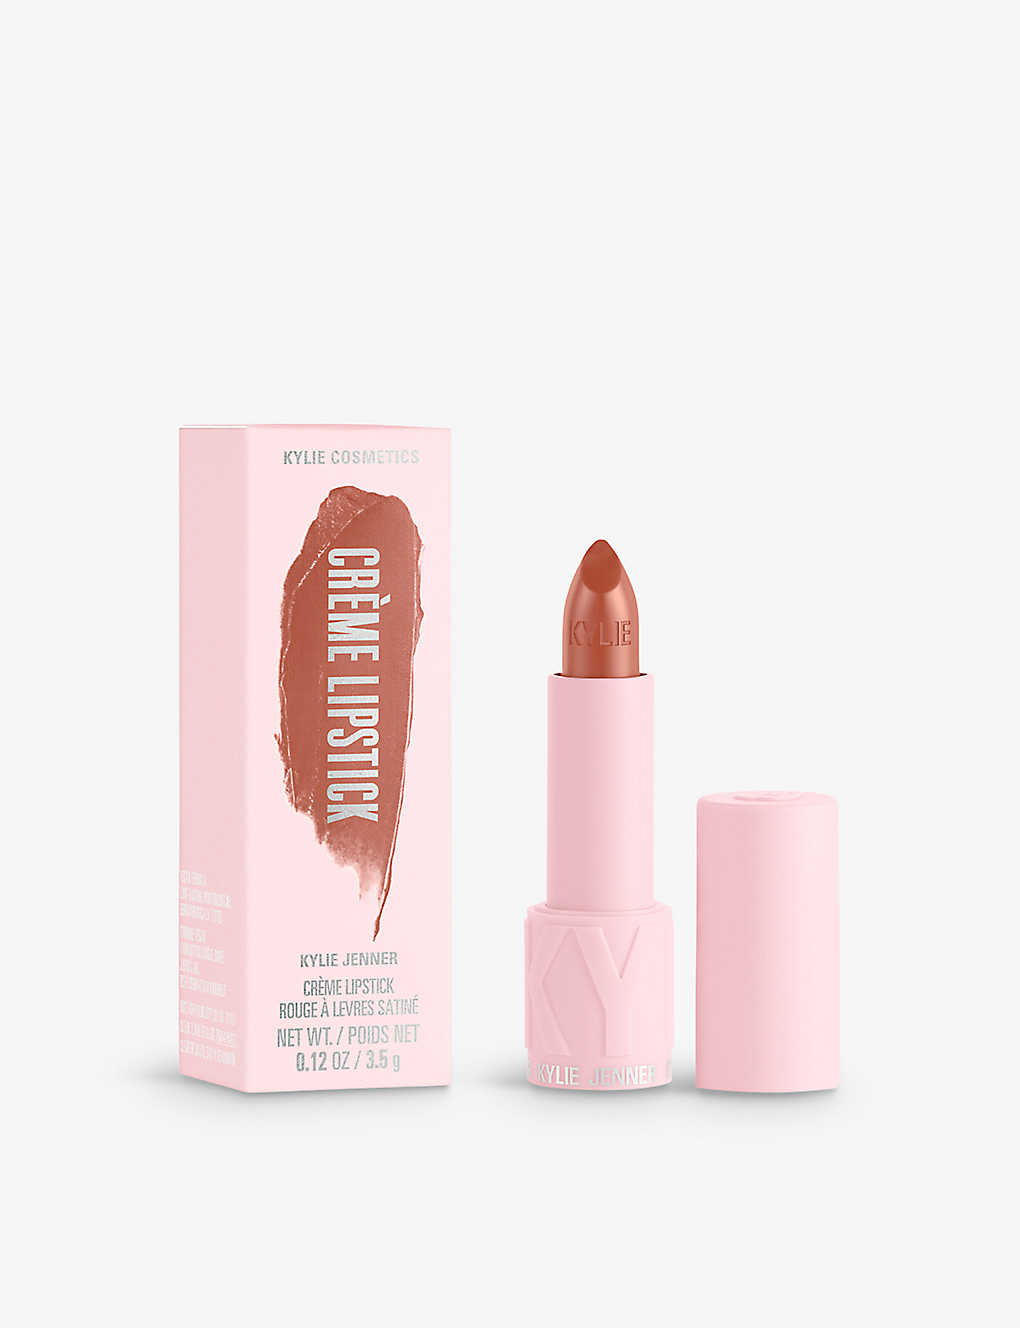 Kylie By Kylie Jenner Crème Lipstick 3.5g In If Looks Could Kill